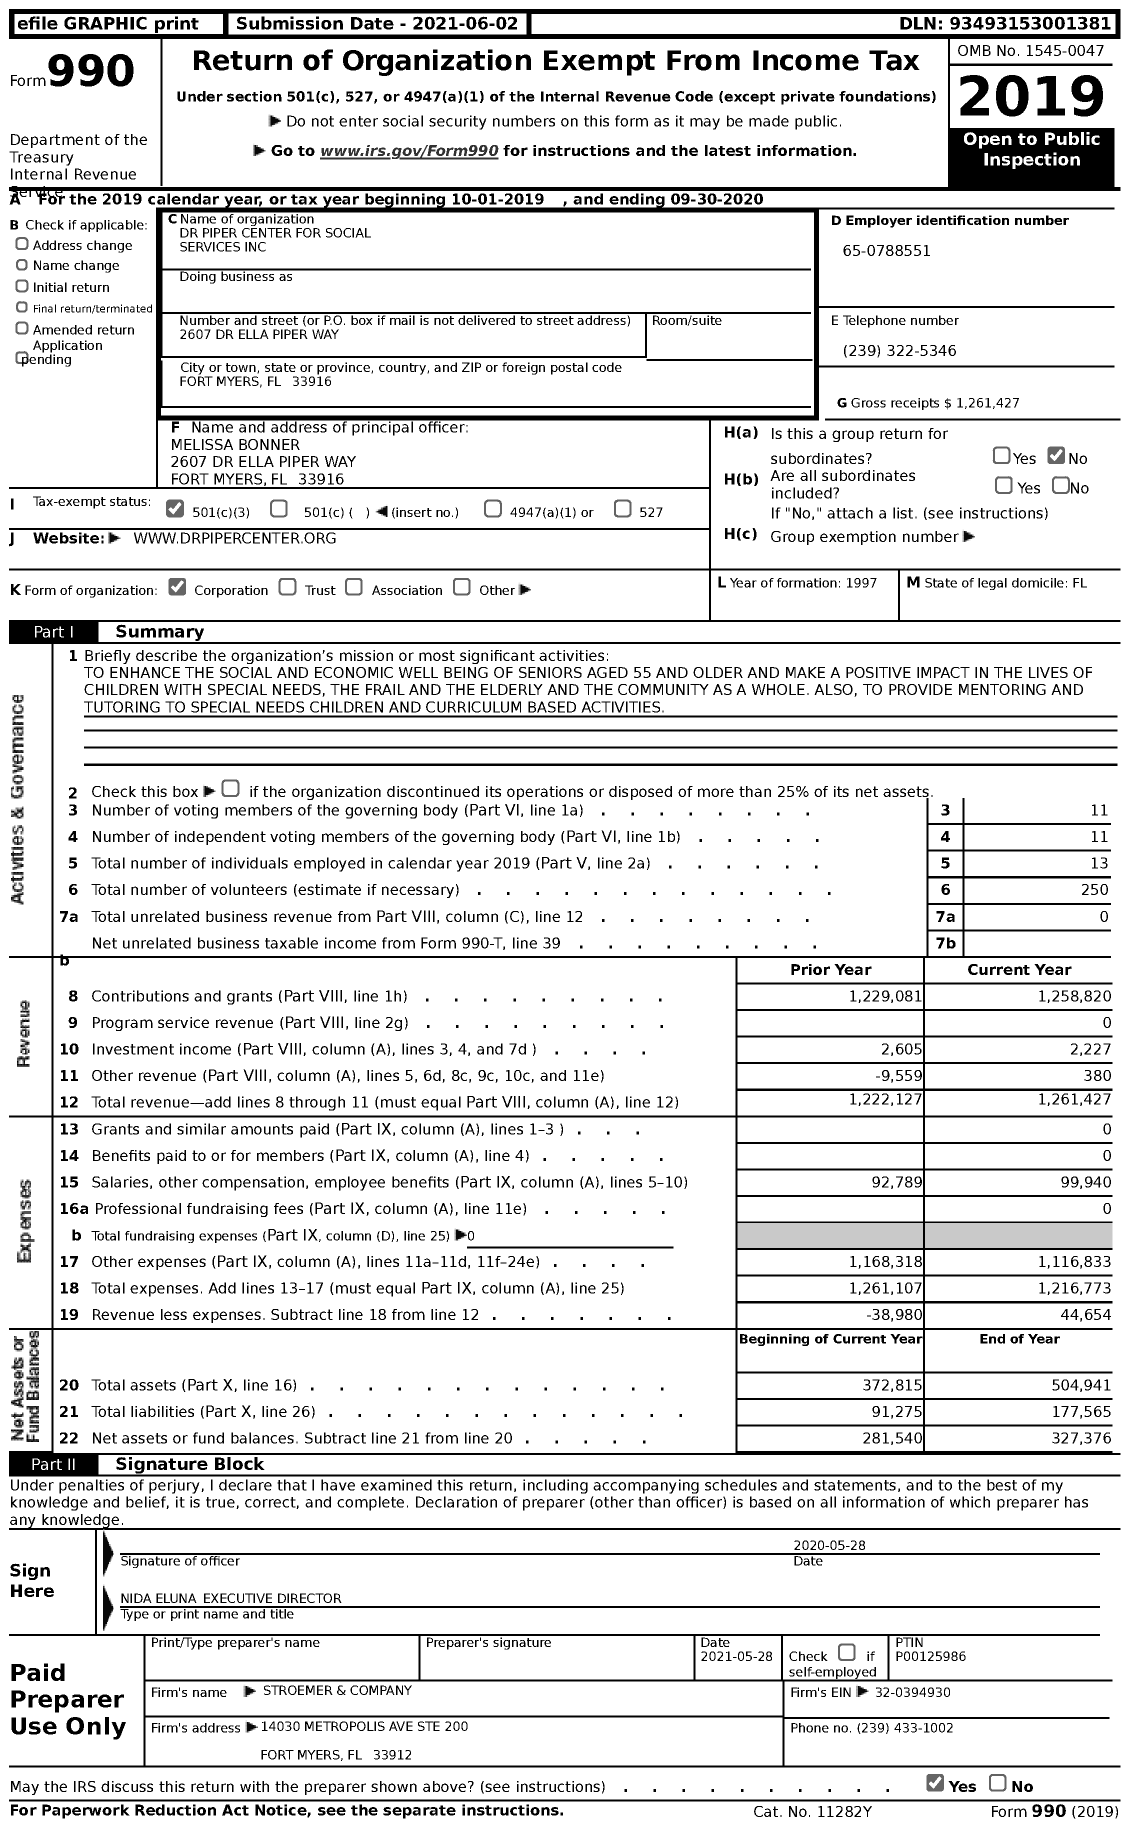 Image of first page of 2019 Form 990 for Dr Piper Center for Social Services